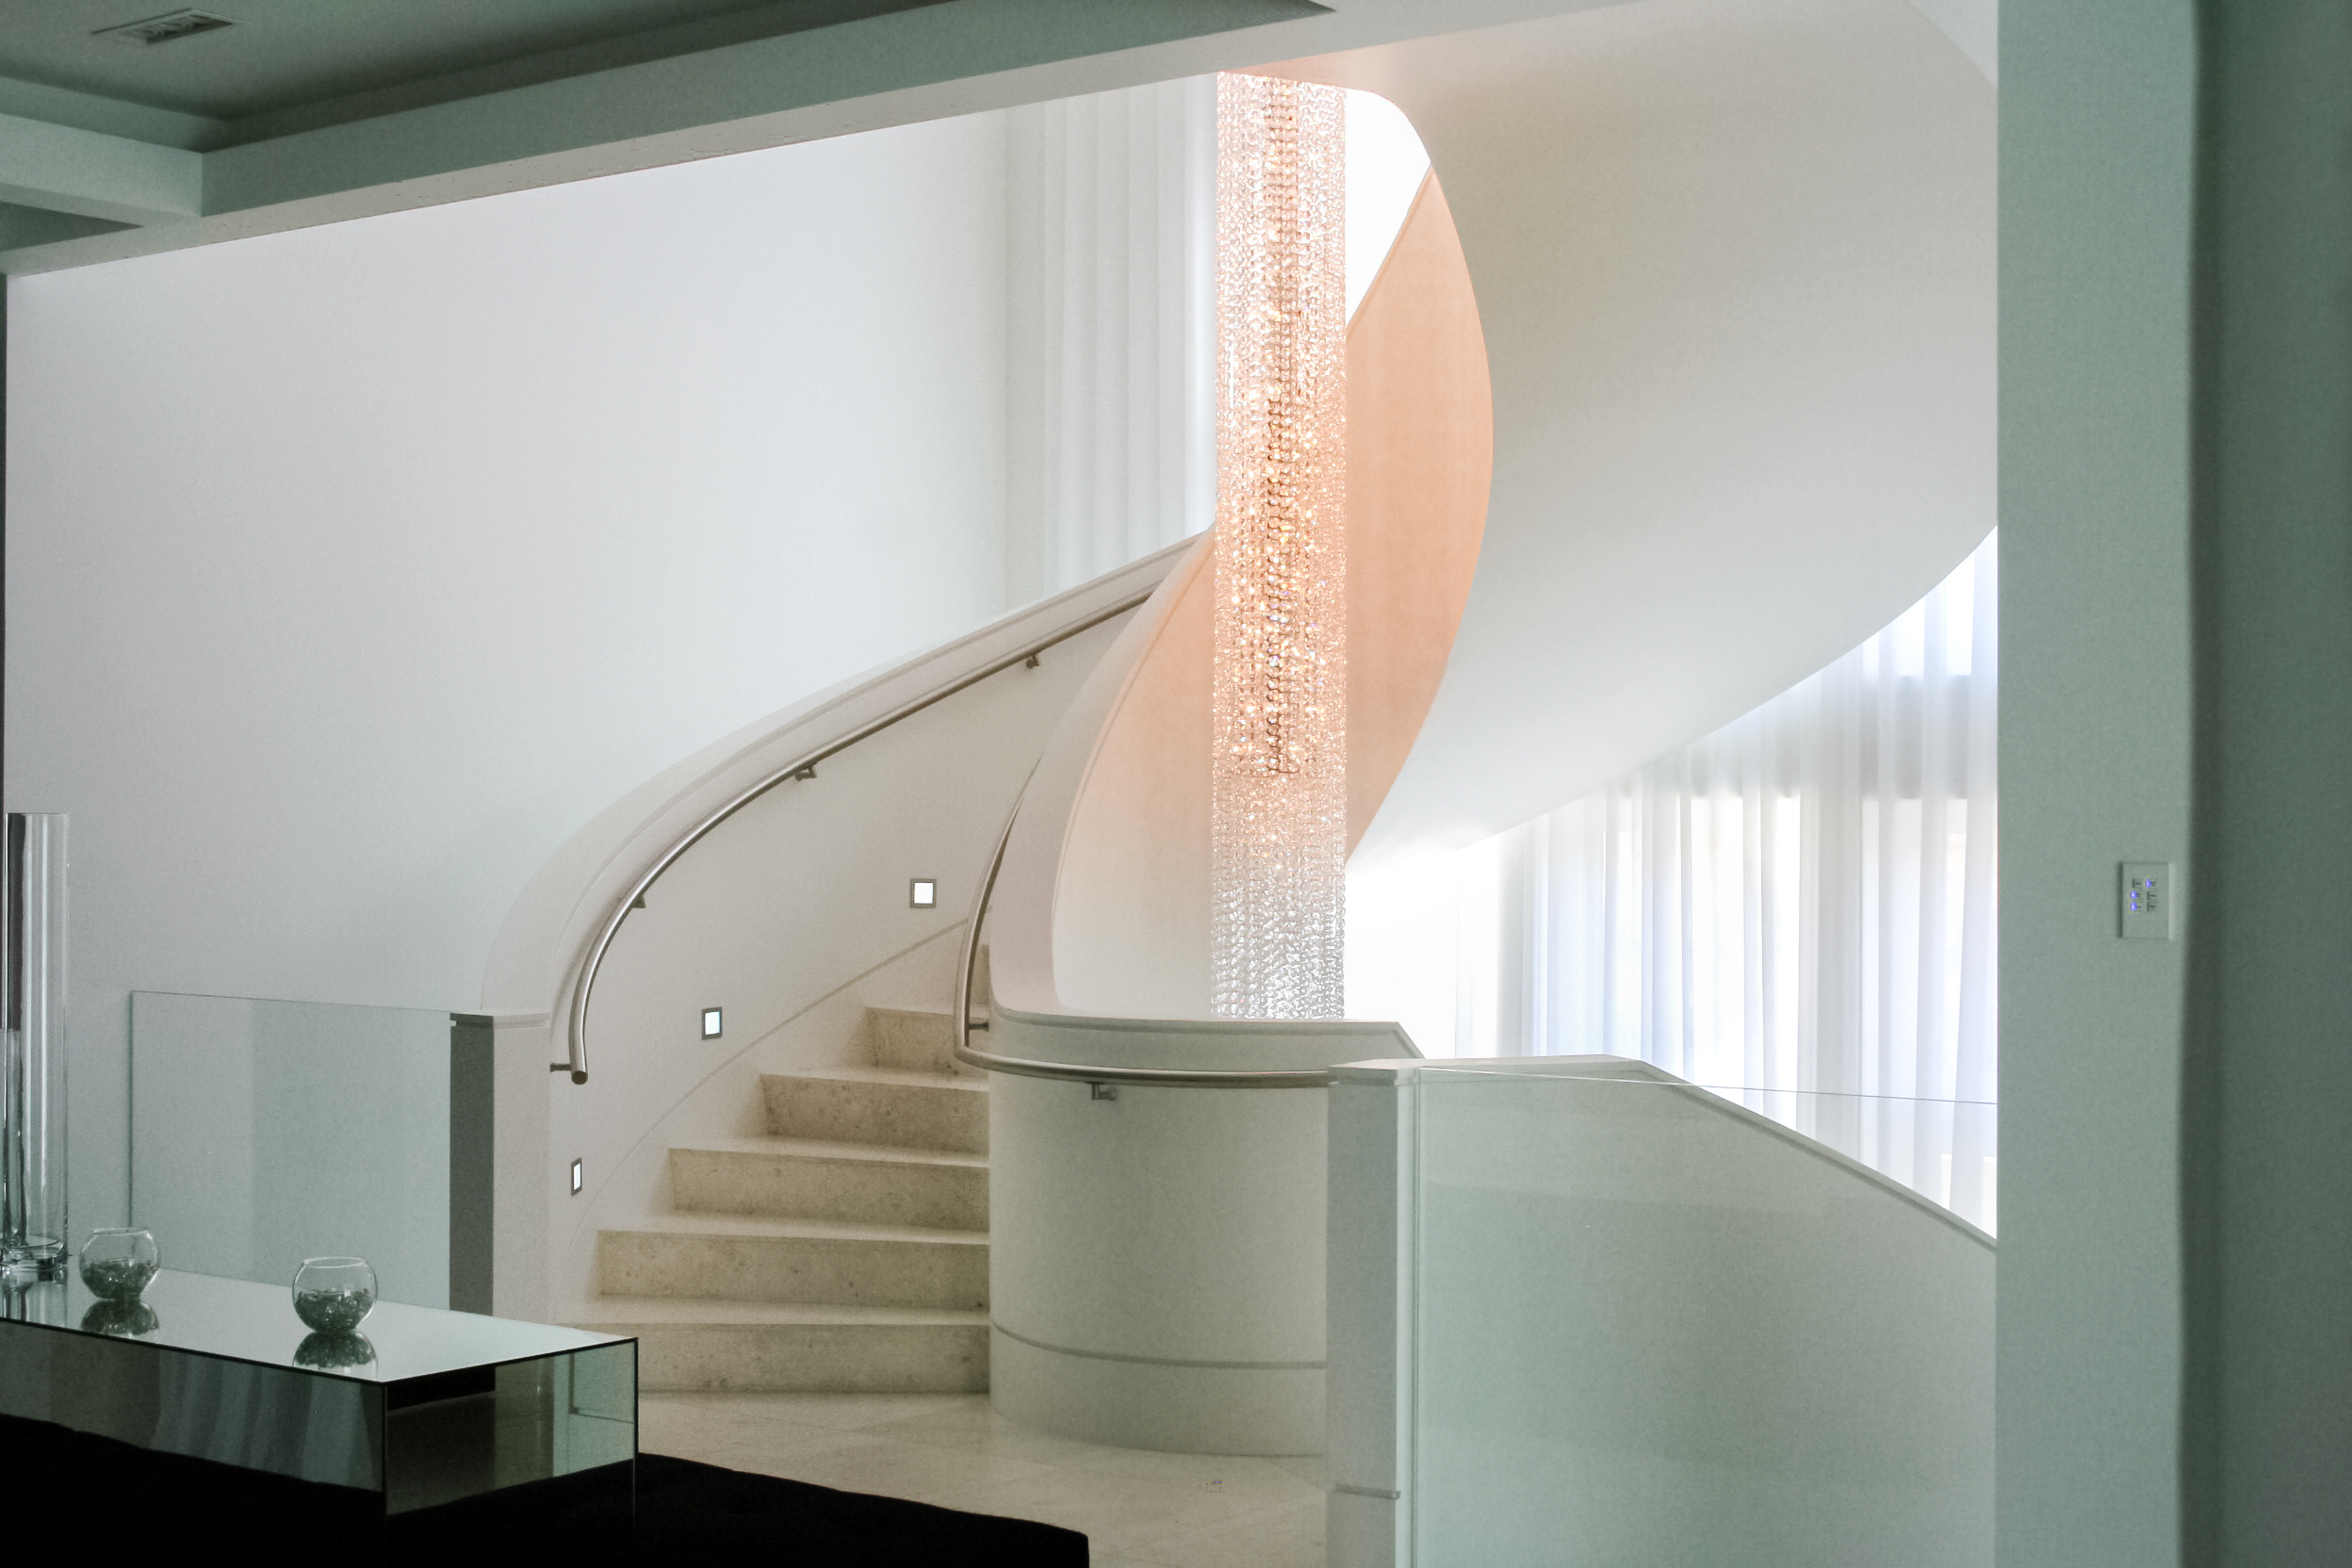 marble - chandelier - stairs - chrome railing - lights - winding - exquisite details - contemporary - white walls - sheer curtains